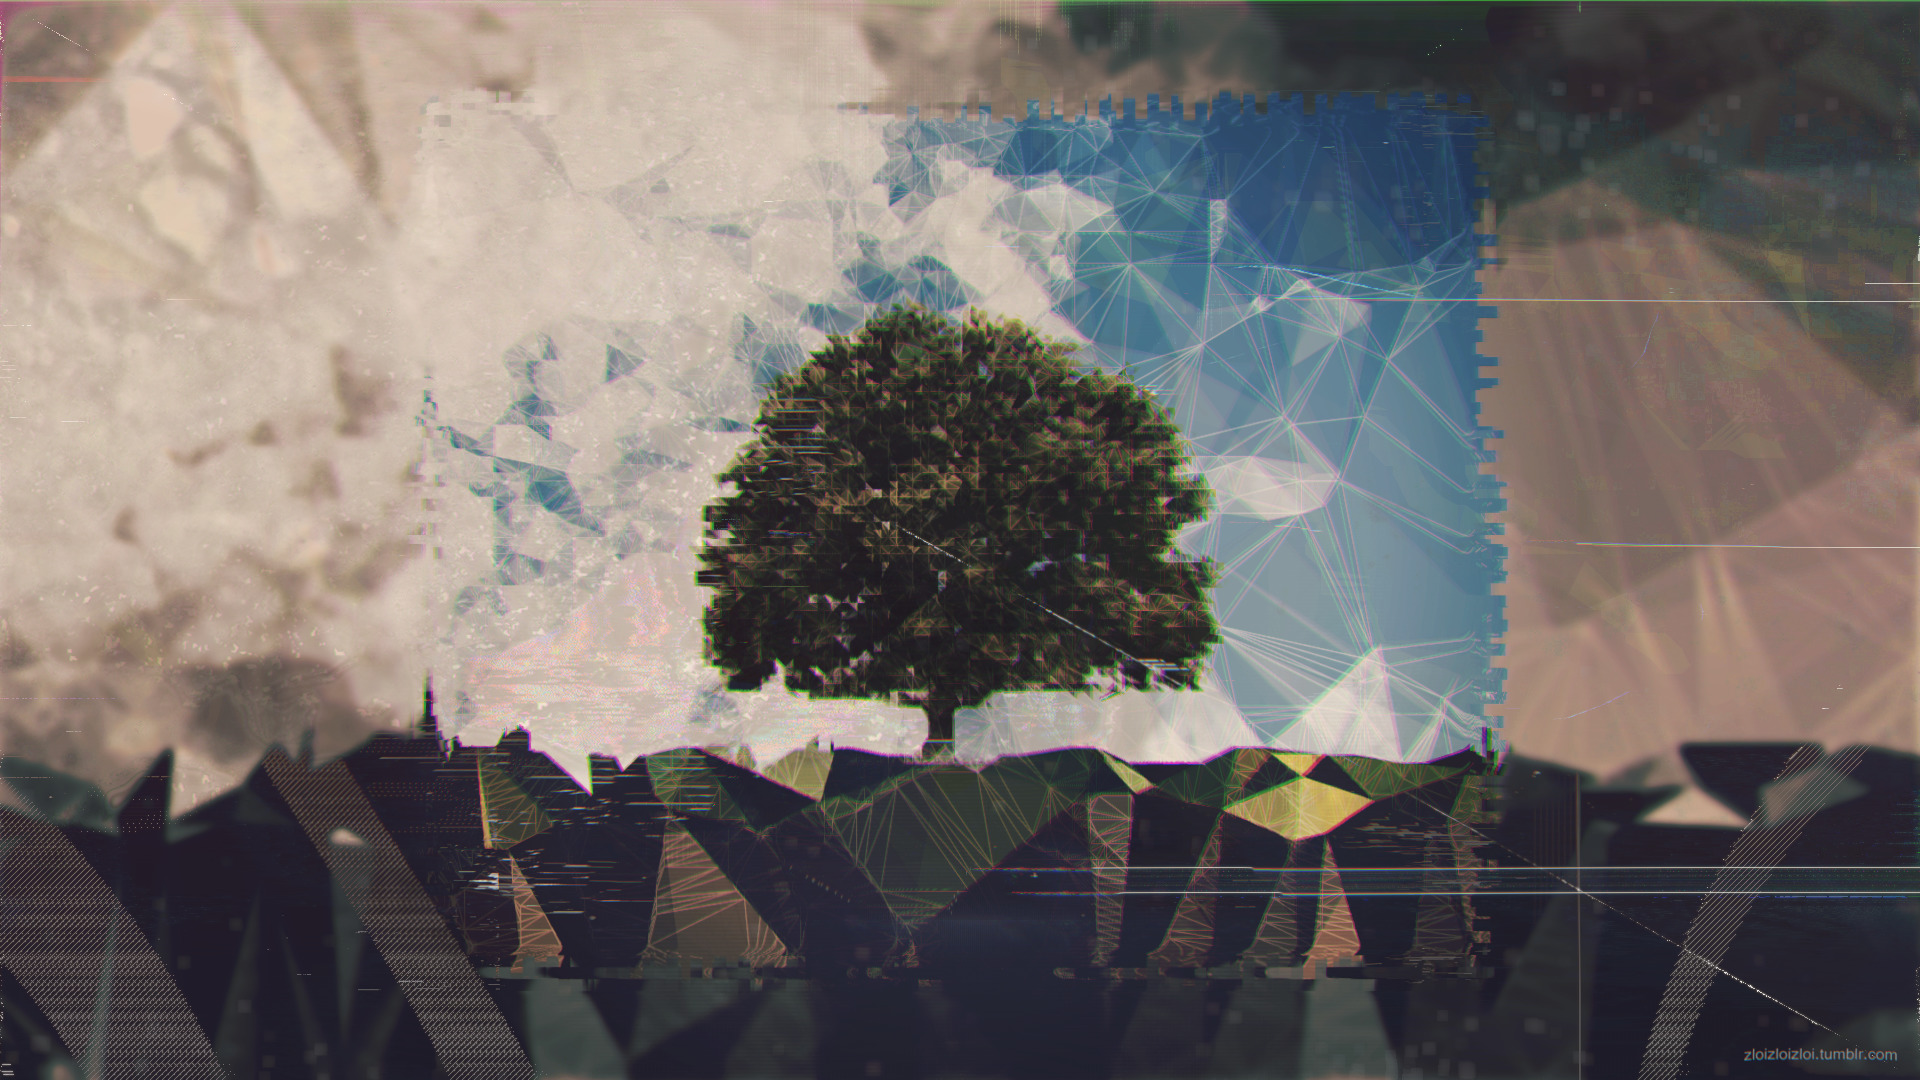 glitch art, Noise, Abstract, Landscape, Nature, Low poly, Trees